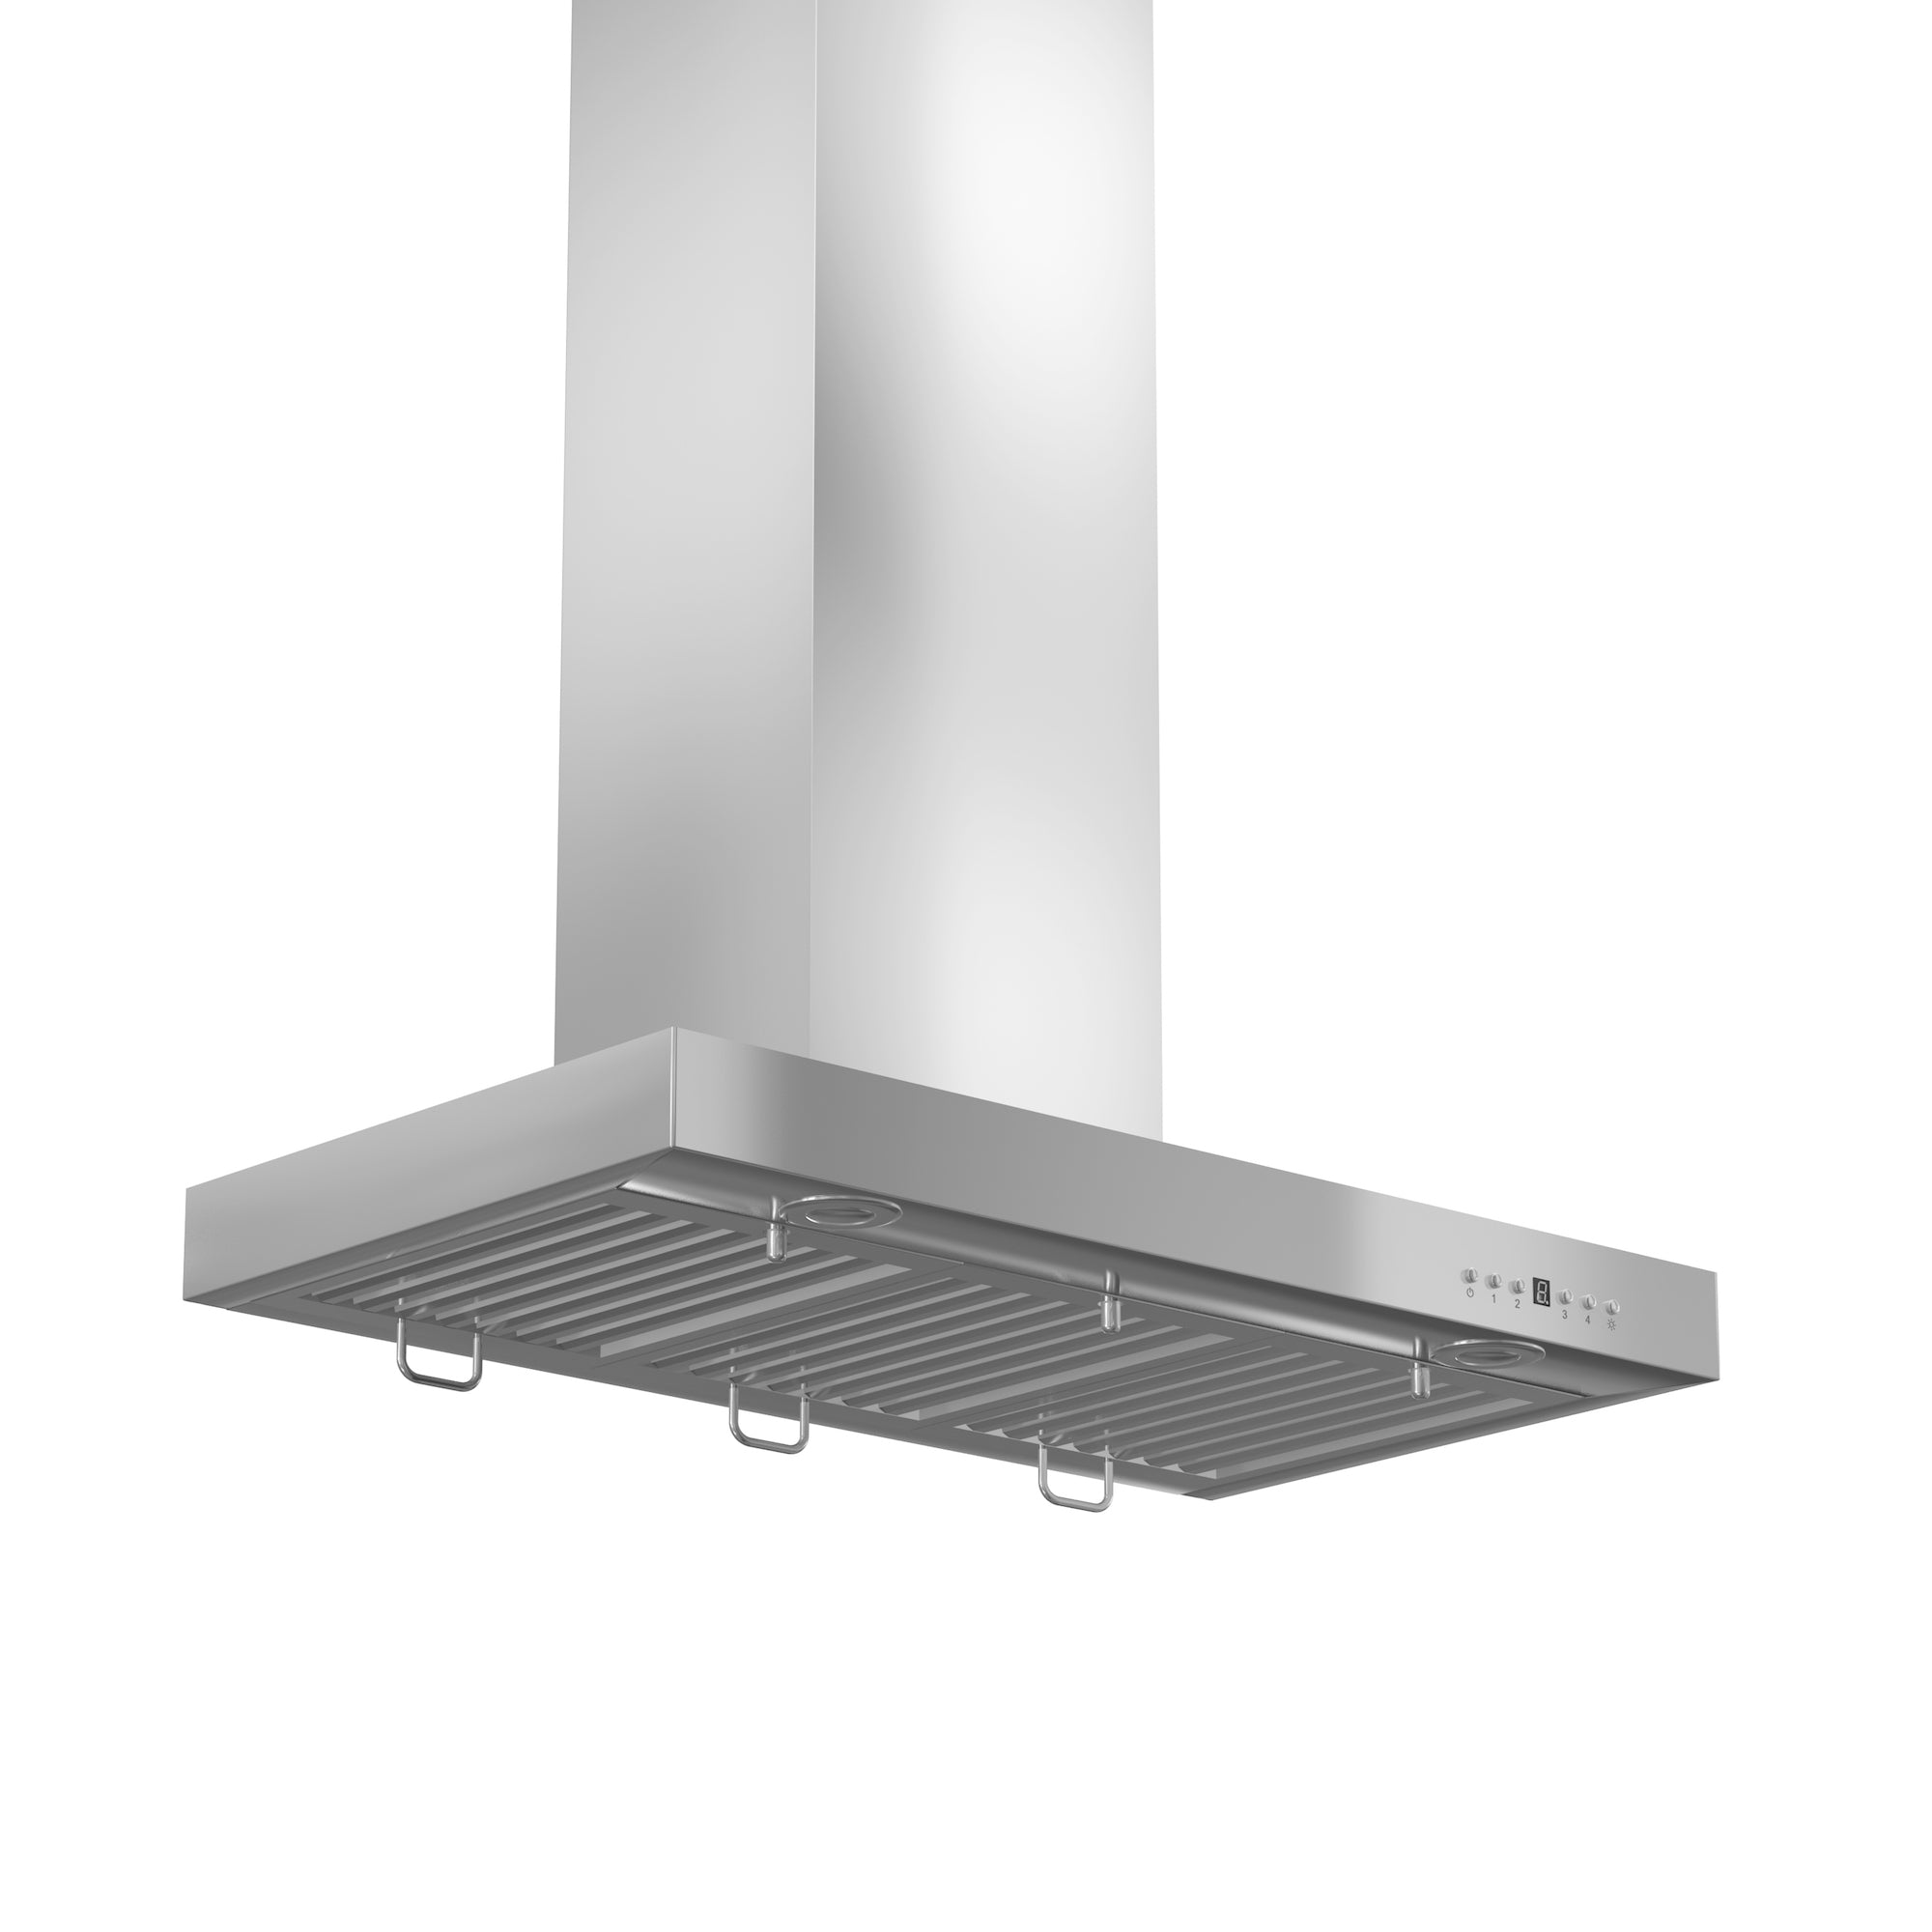 ZLINE 36" Convertible Vent Wall Mount Range Hood in Stainless Steel with Crown Molding (KECRN-36)